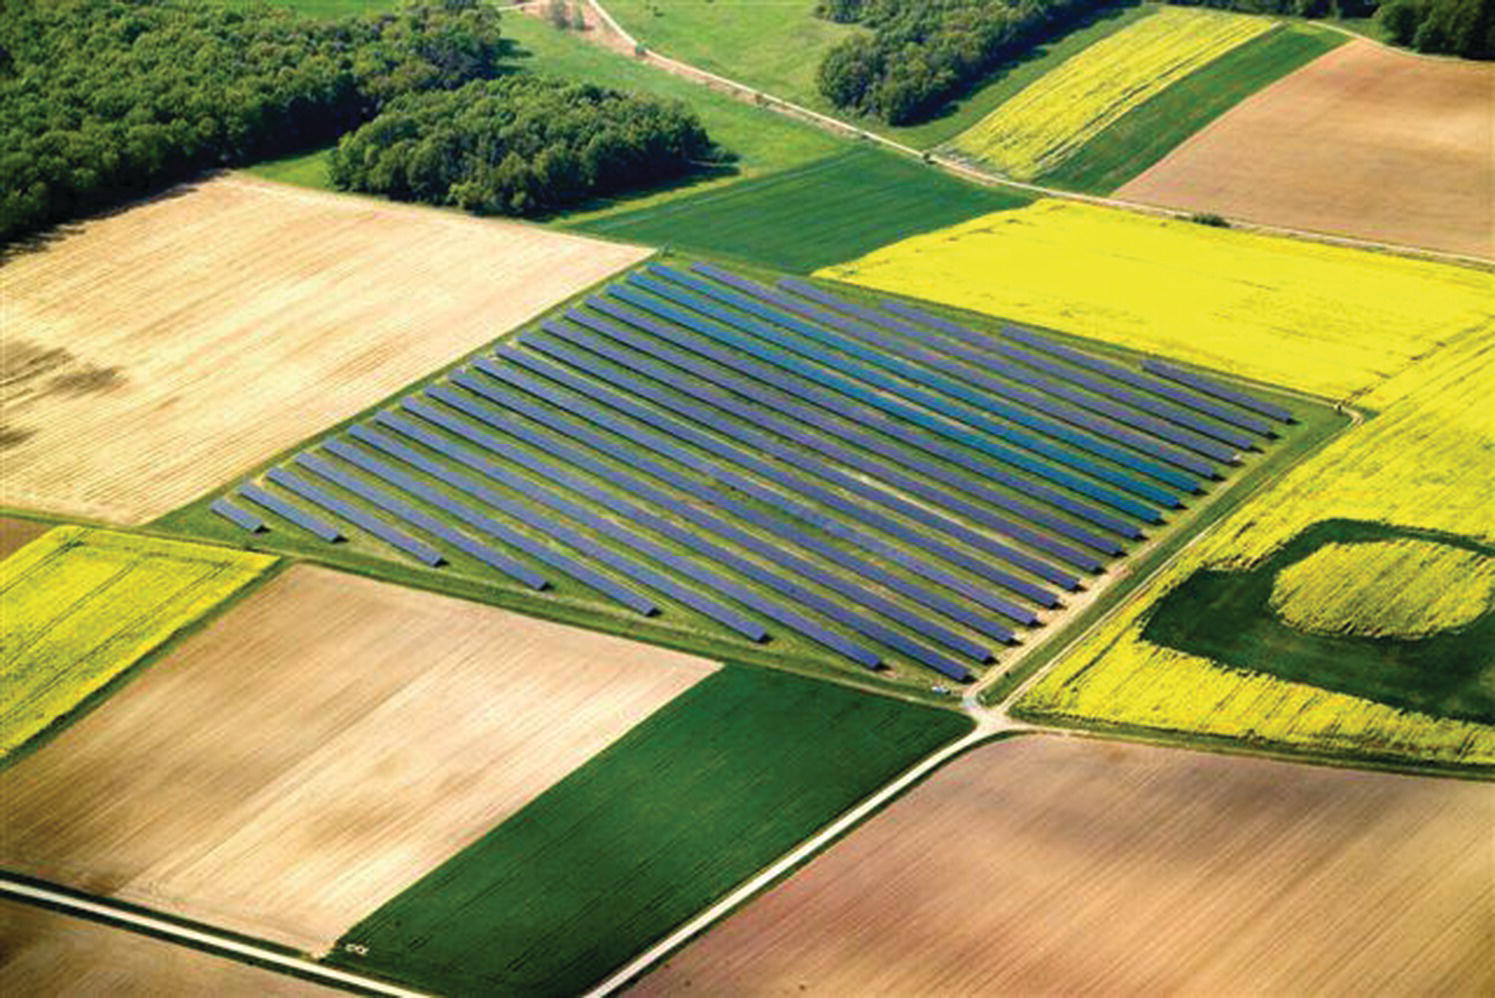 Aerial view of the 1.3 MW PV power plant at Dimbach, Germany.